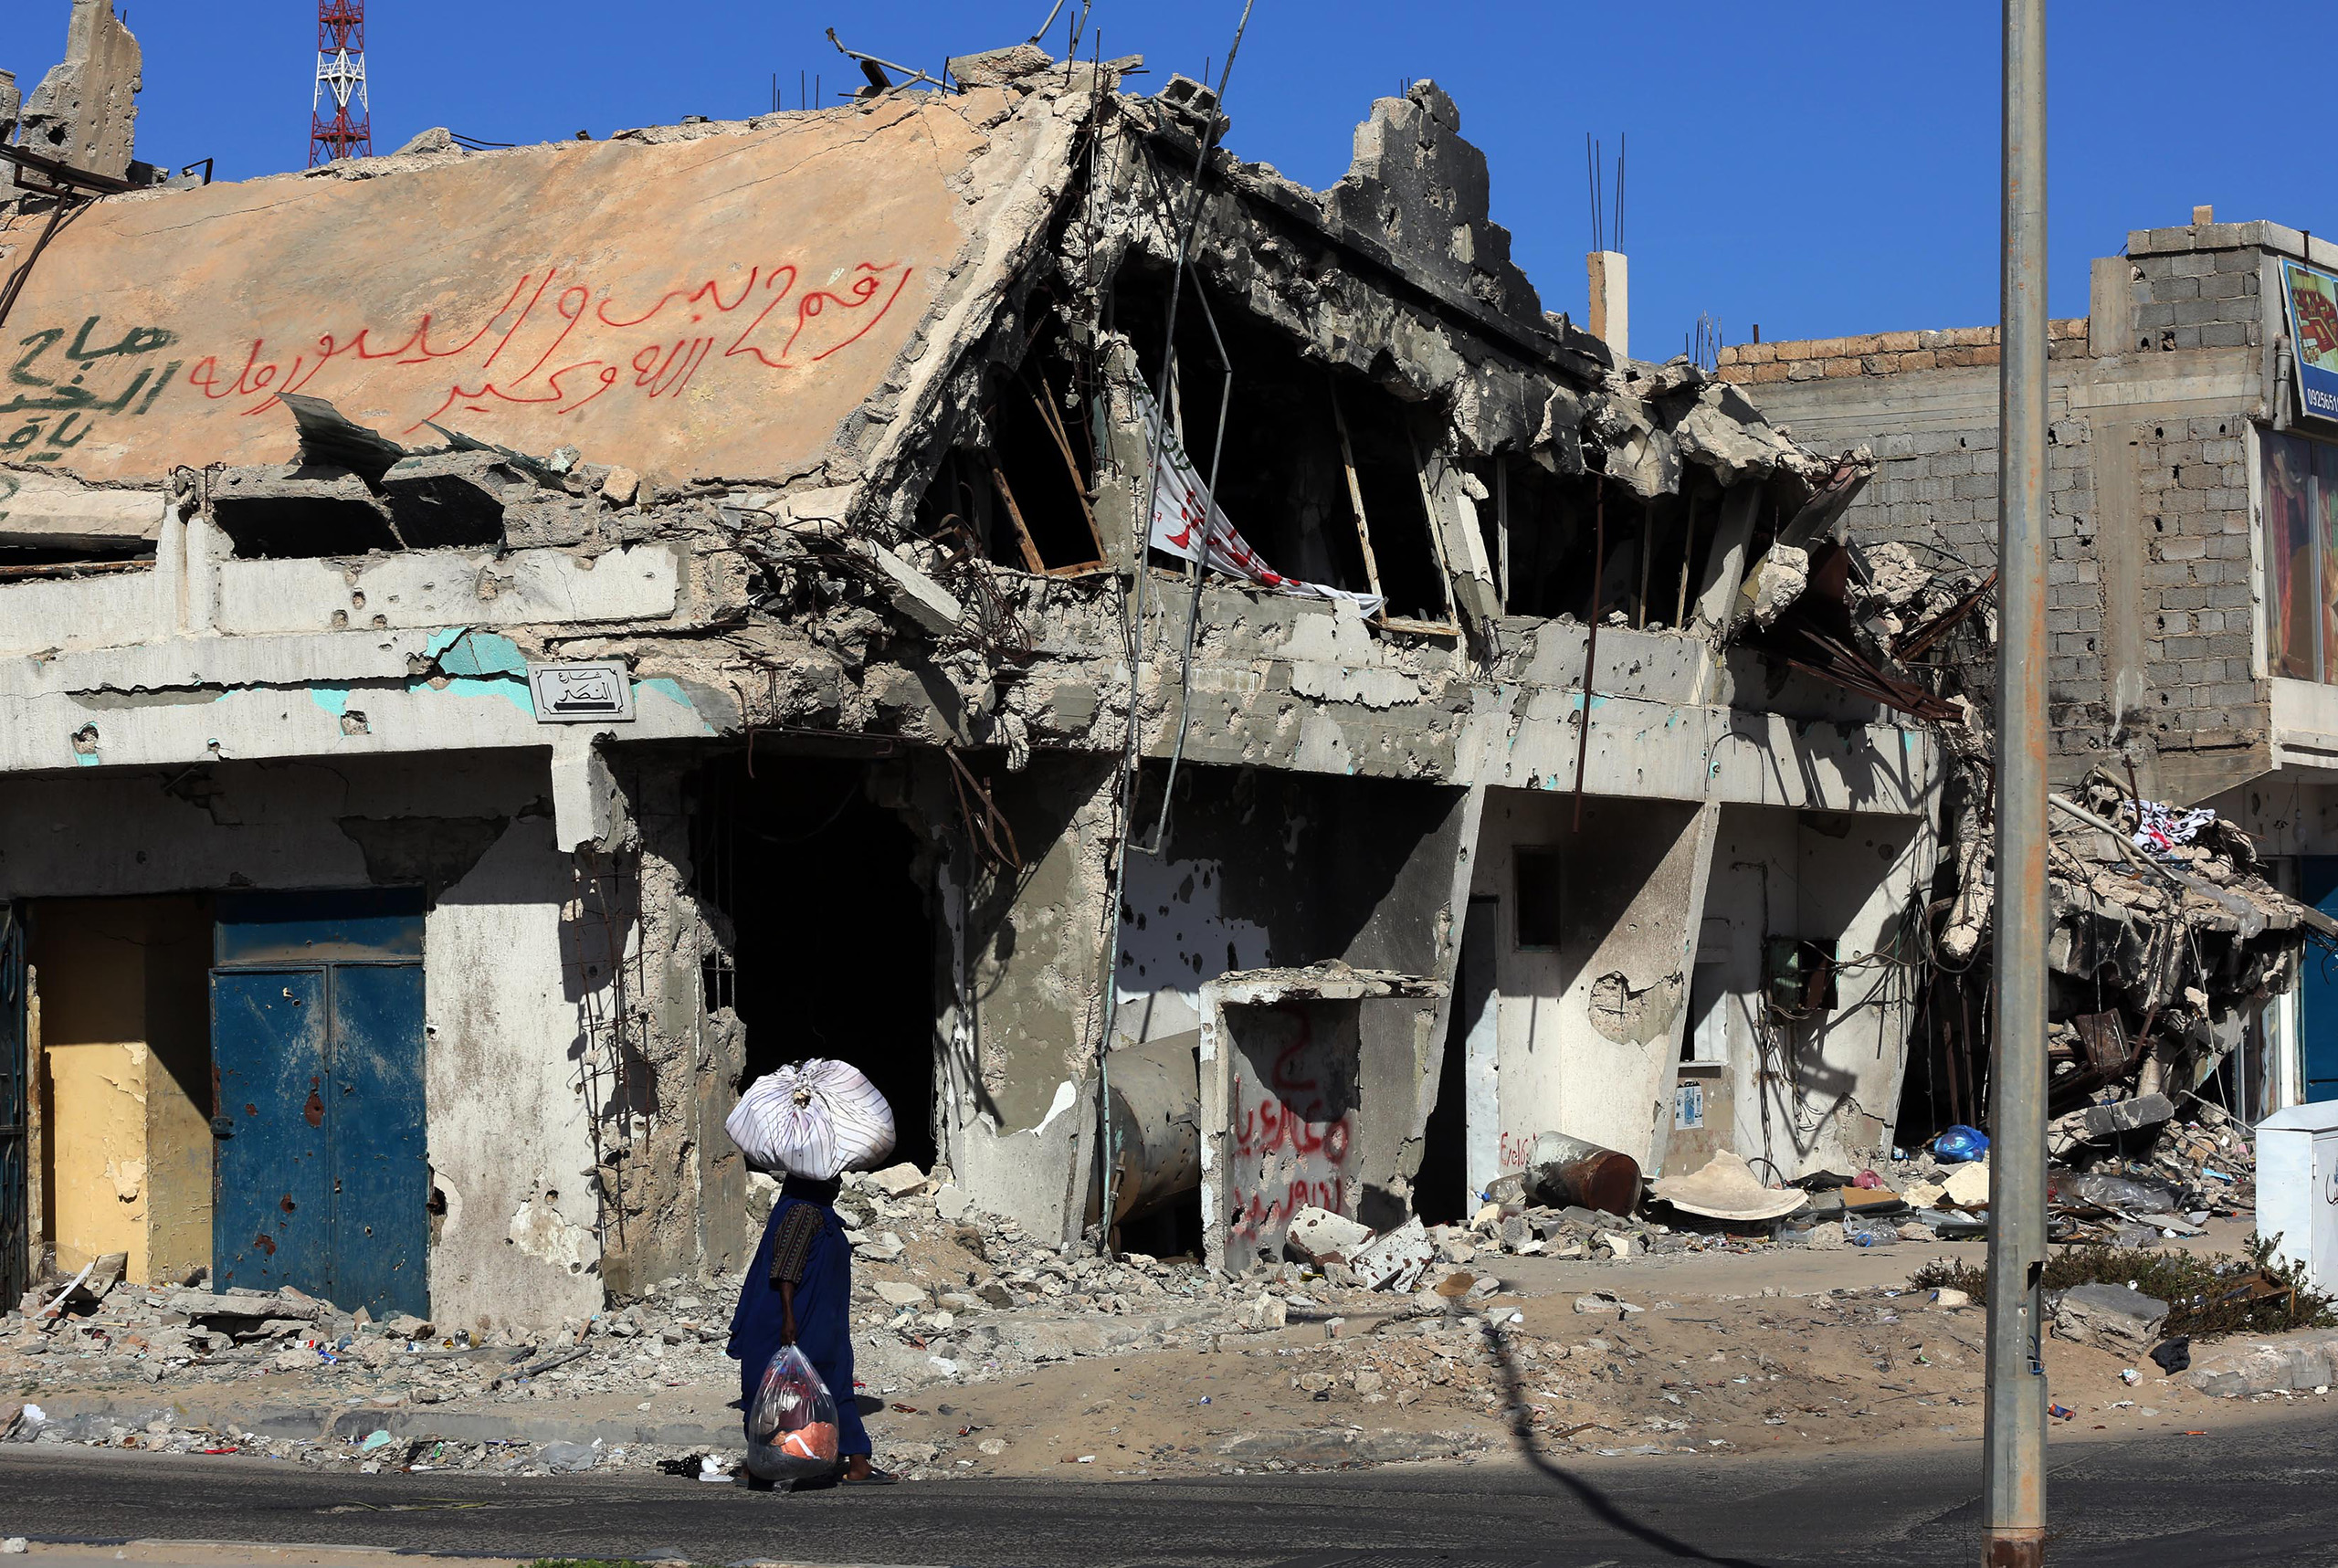 A Libyan woman walks past the rubble of a building in the Mediterranean city of Sirte, Oct. 13, 2012. (Mahmud Turkia—AFP/Getty Images)